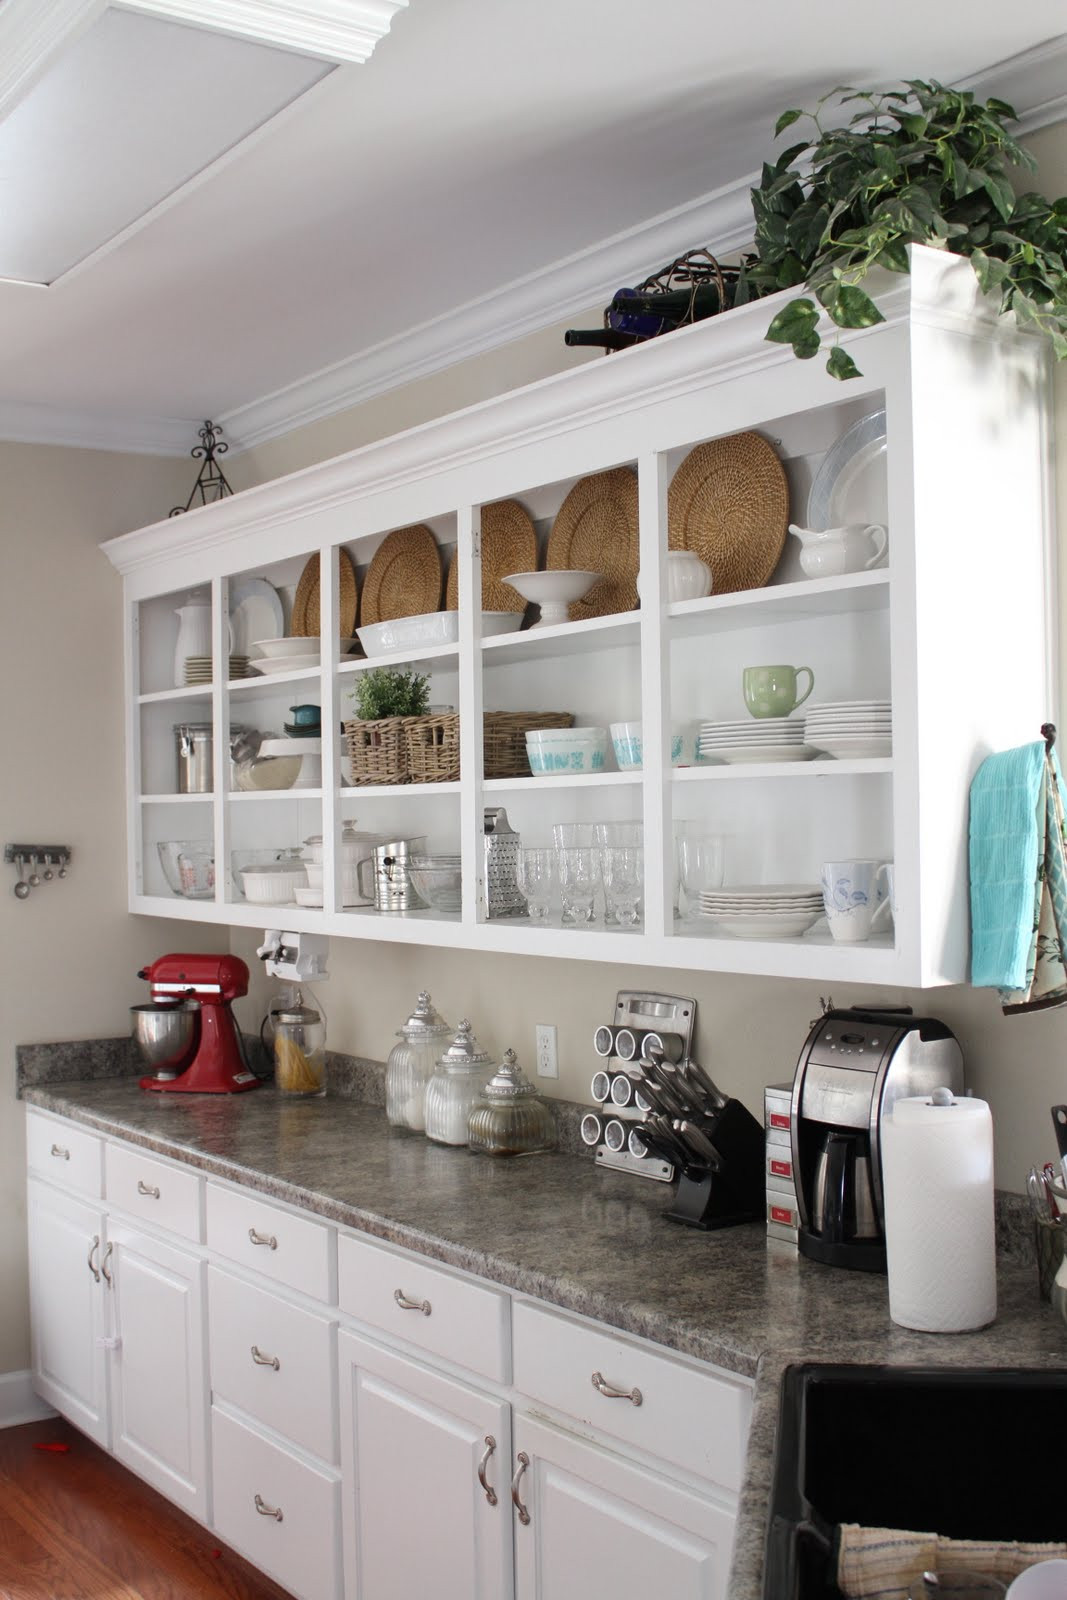 Kitchen Cabinet Storage Unit
 Kitchen Inspiration Swoon Worthy Open Shelving Swoon Worthy